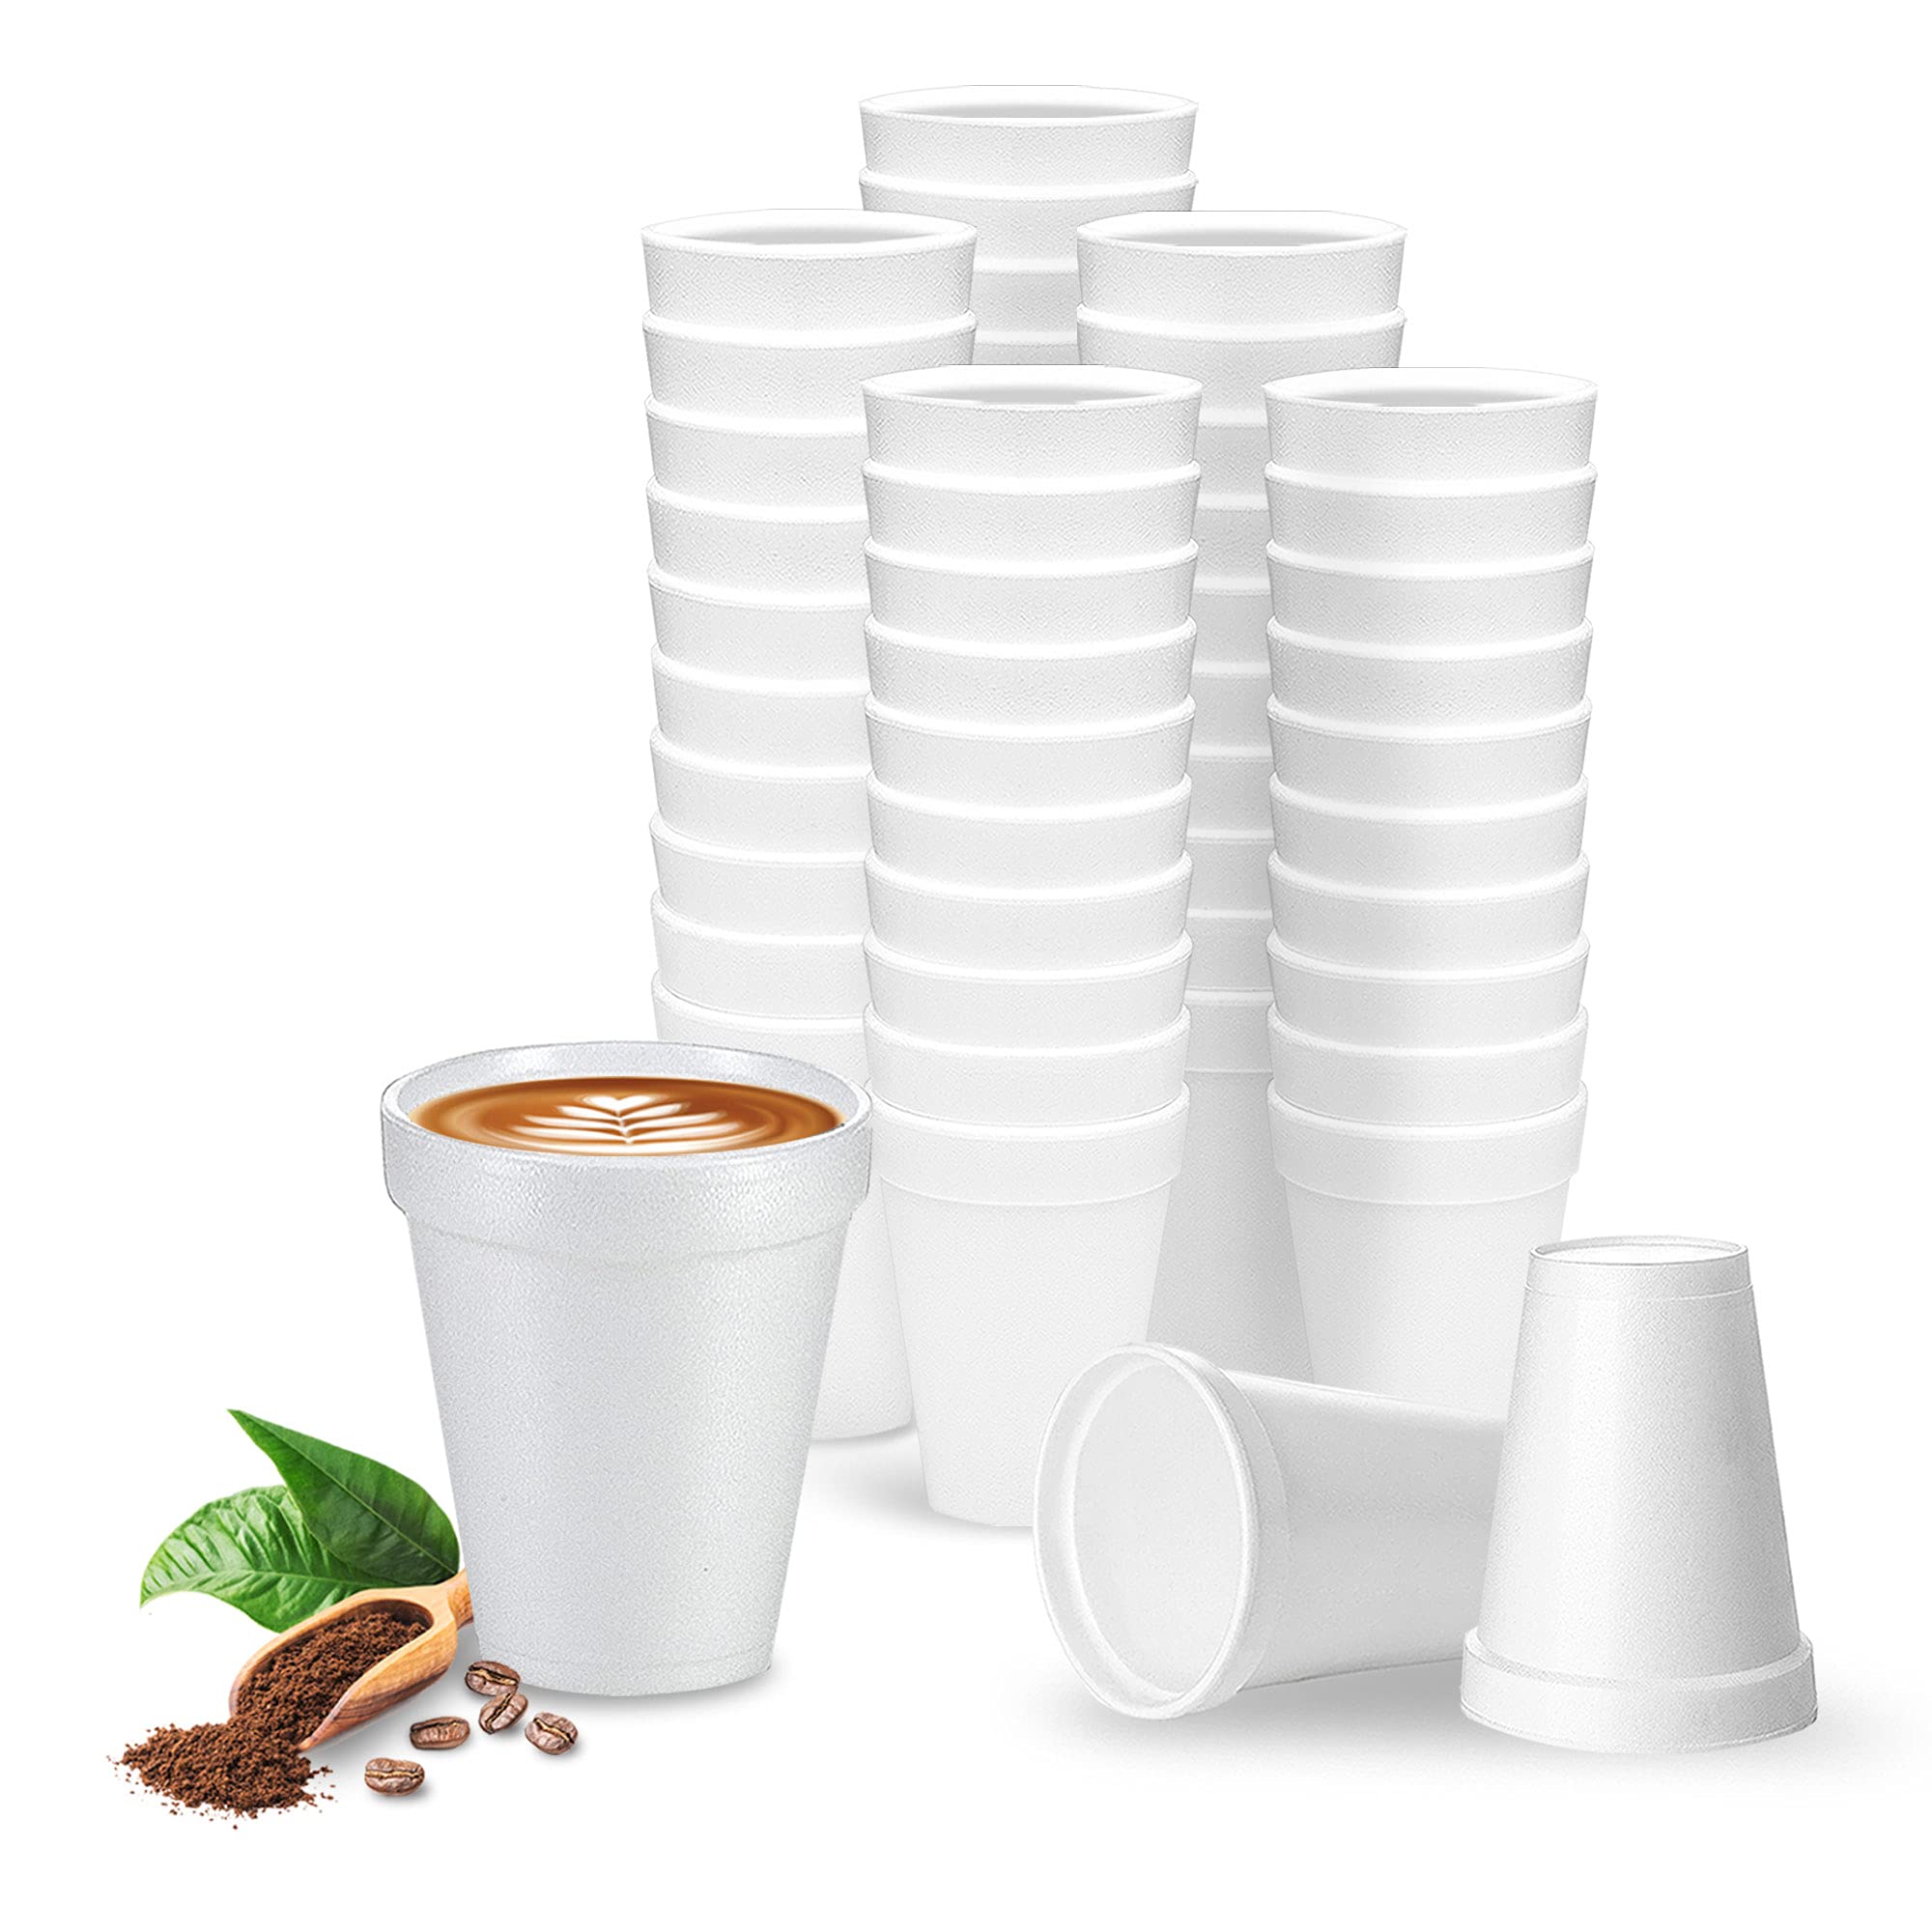 Wincup Drinking Cup 12oz. White Styrofoam Disposable - 1000CT